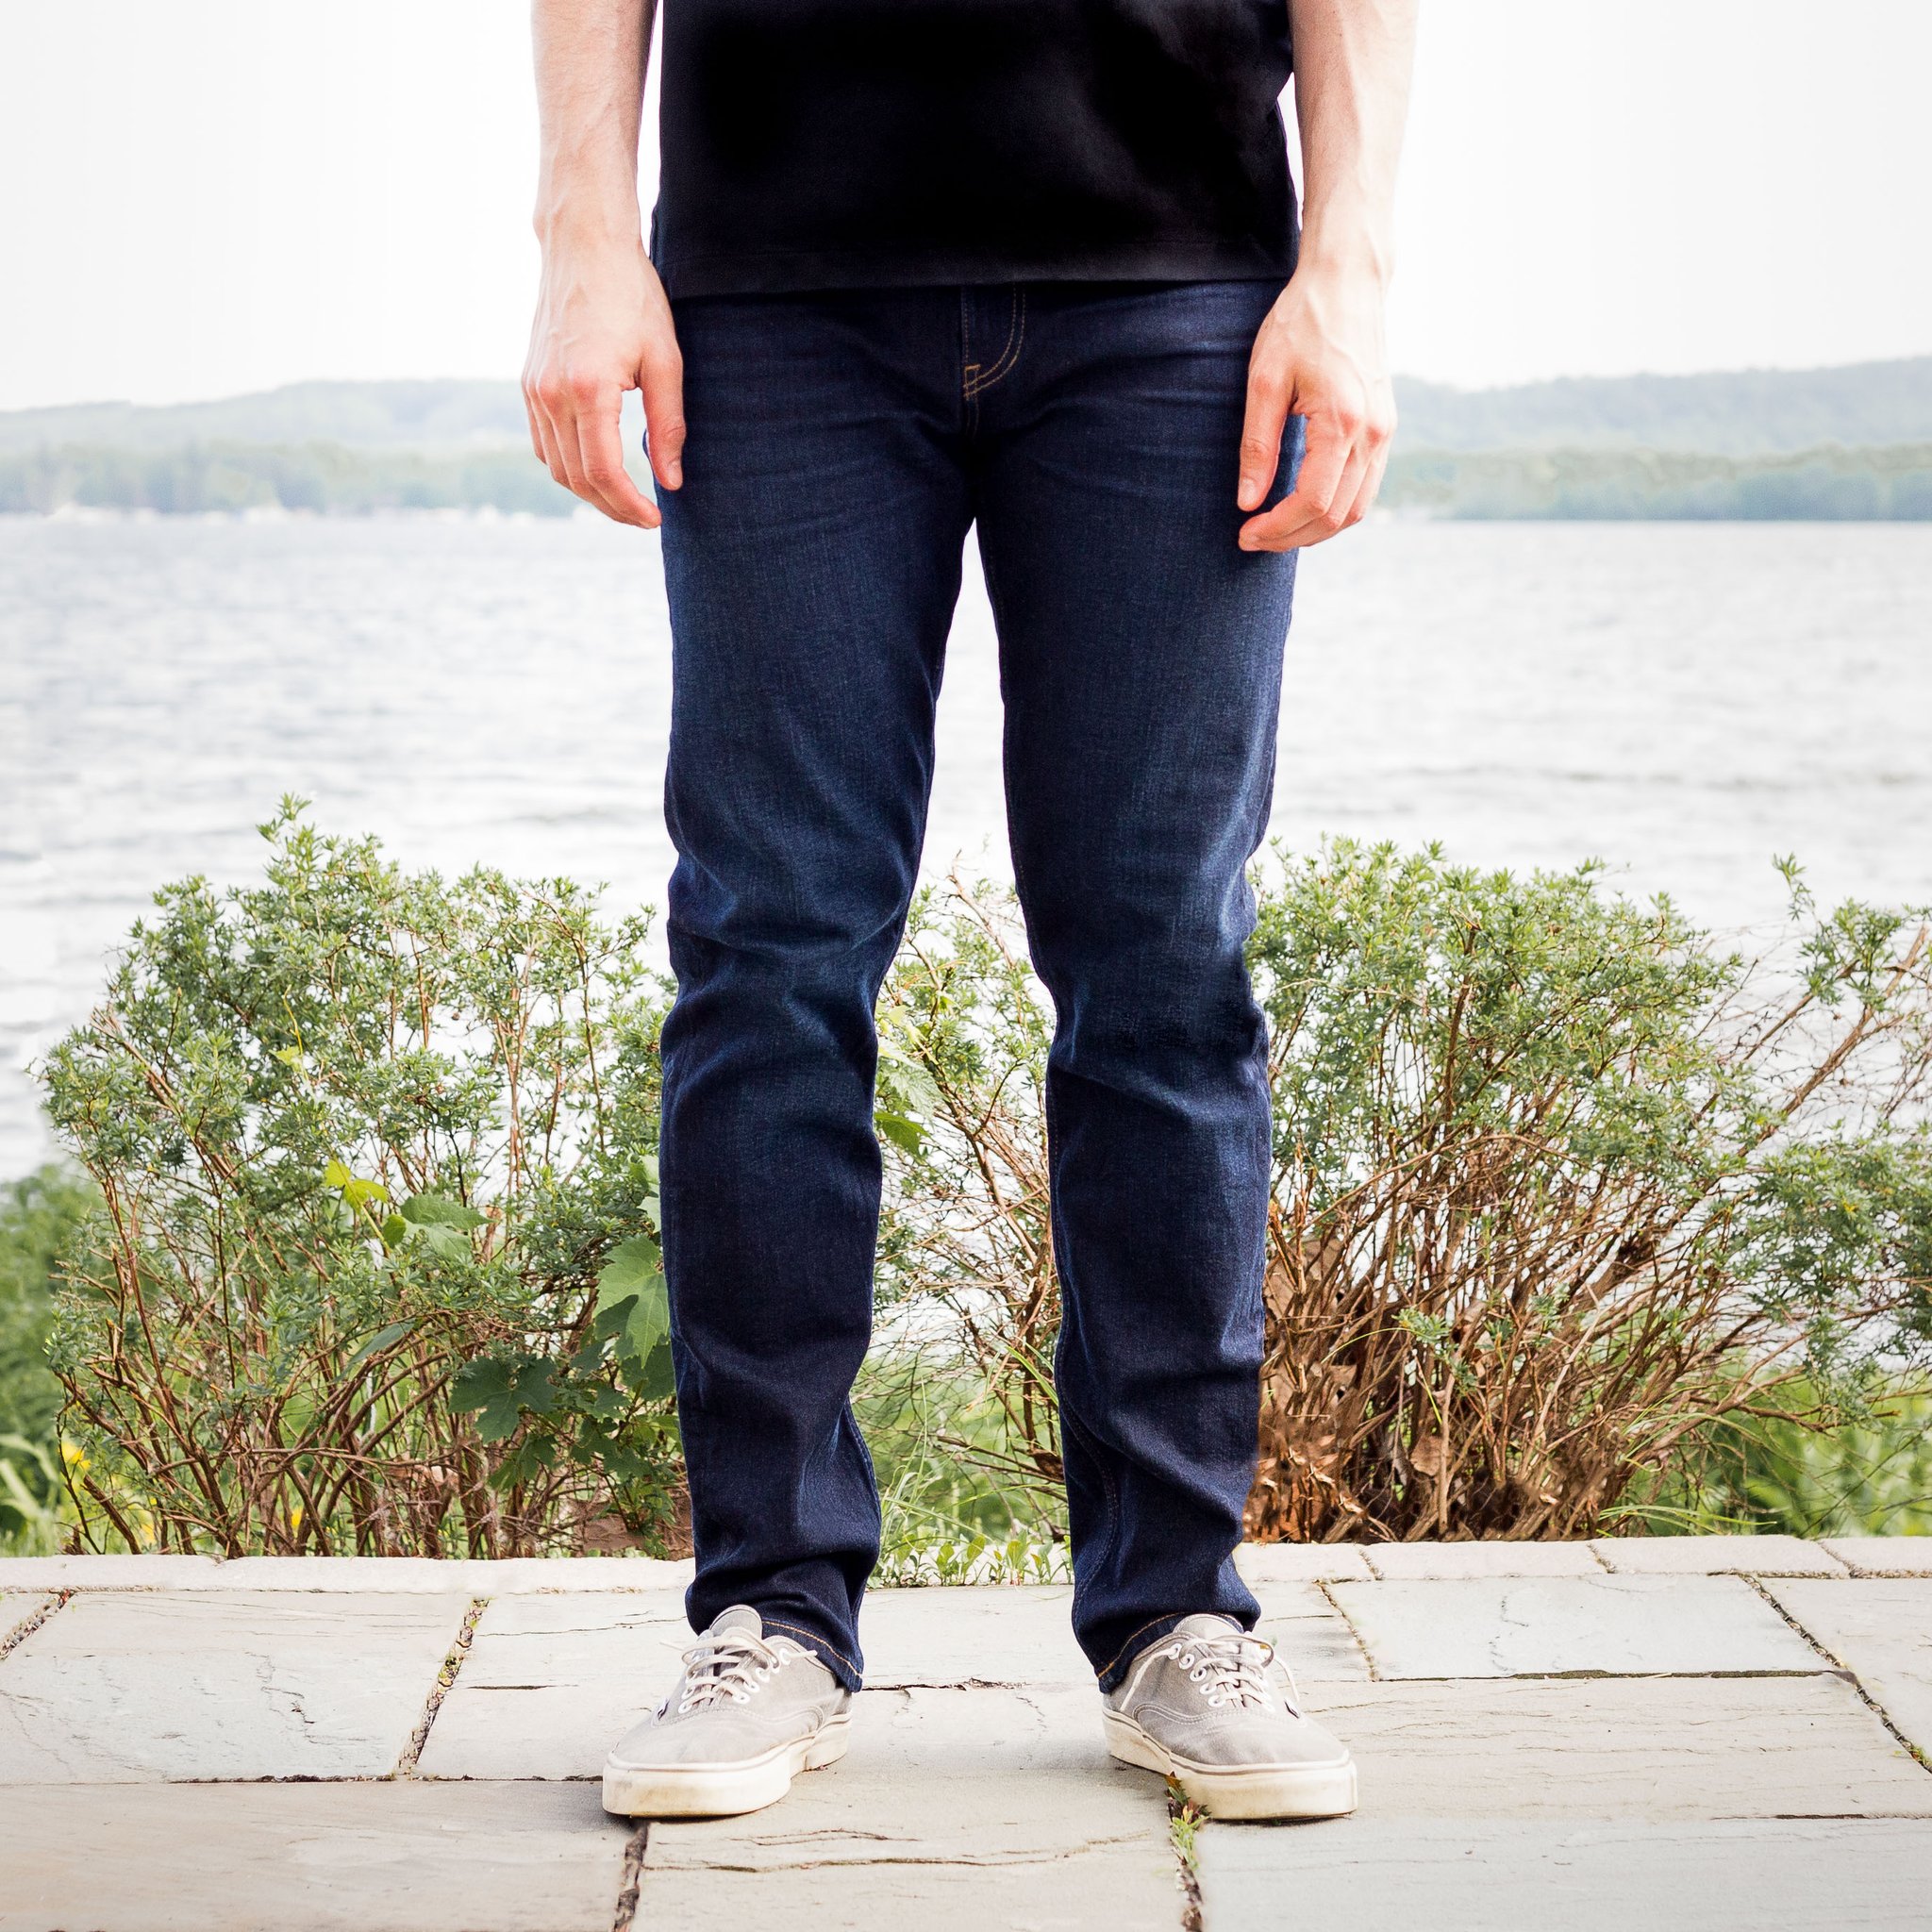 Revtown Jeans Review: This New Denim Brand For Men Makes The